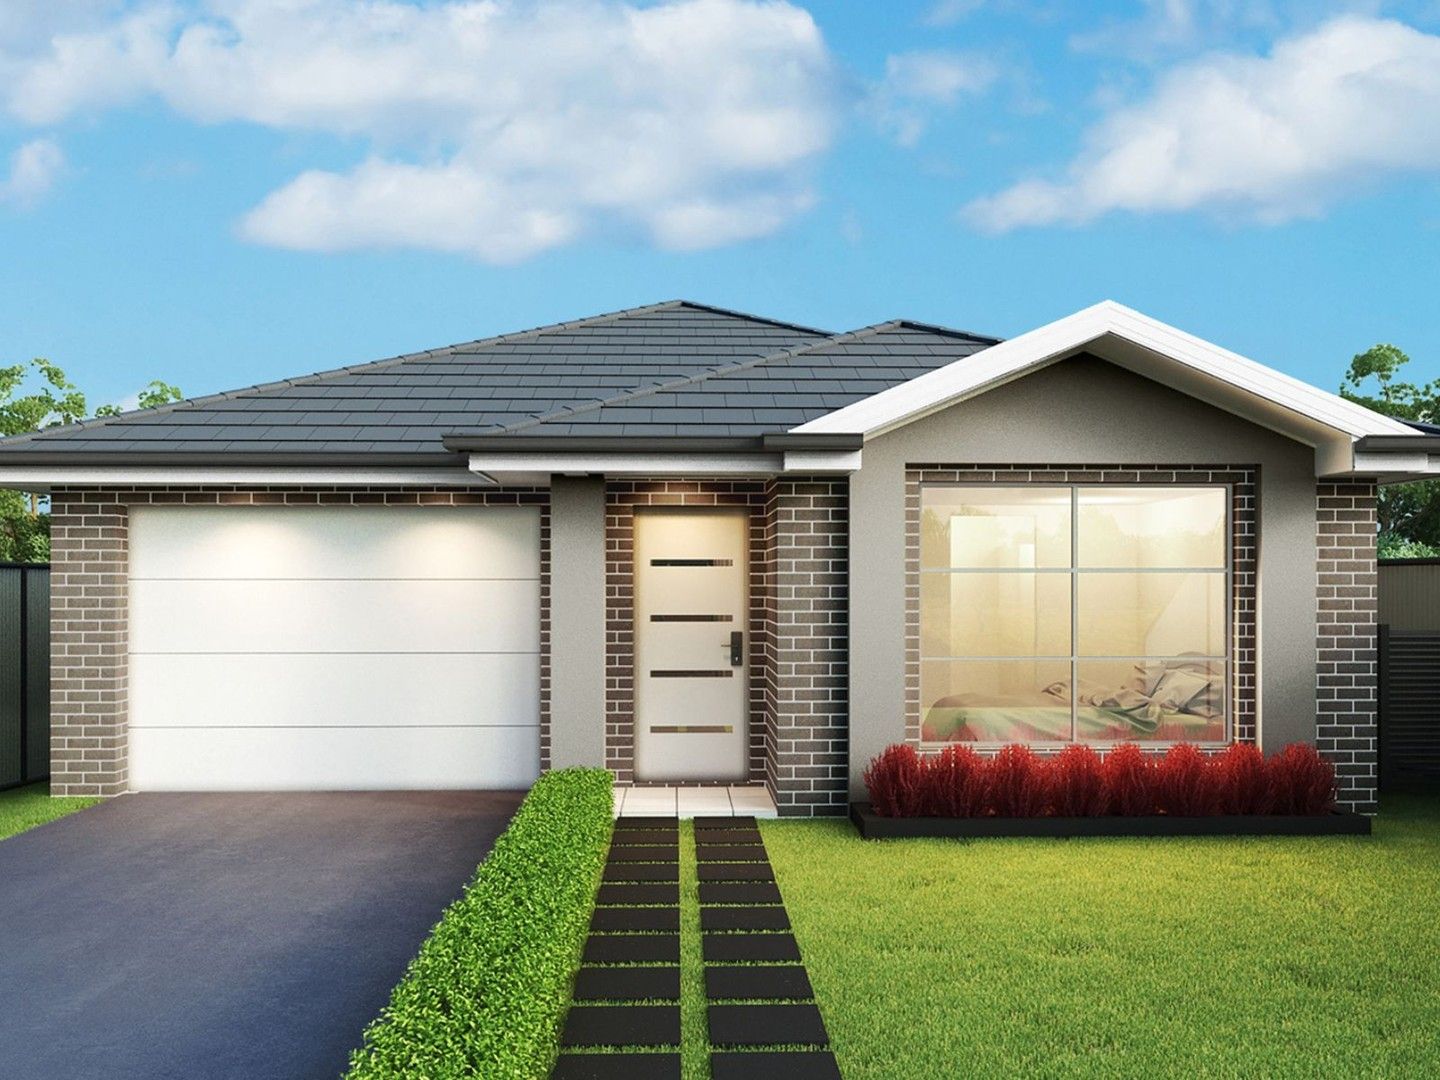 4 bedrooms New House & Land in Selling Fast Last Few Lots Left BOX HILL NSW, 2765